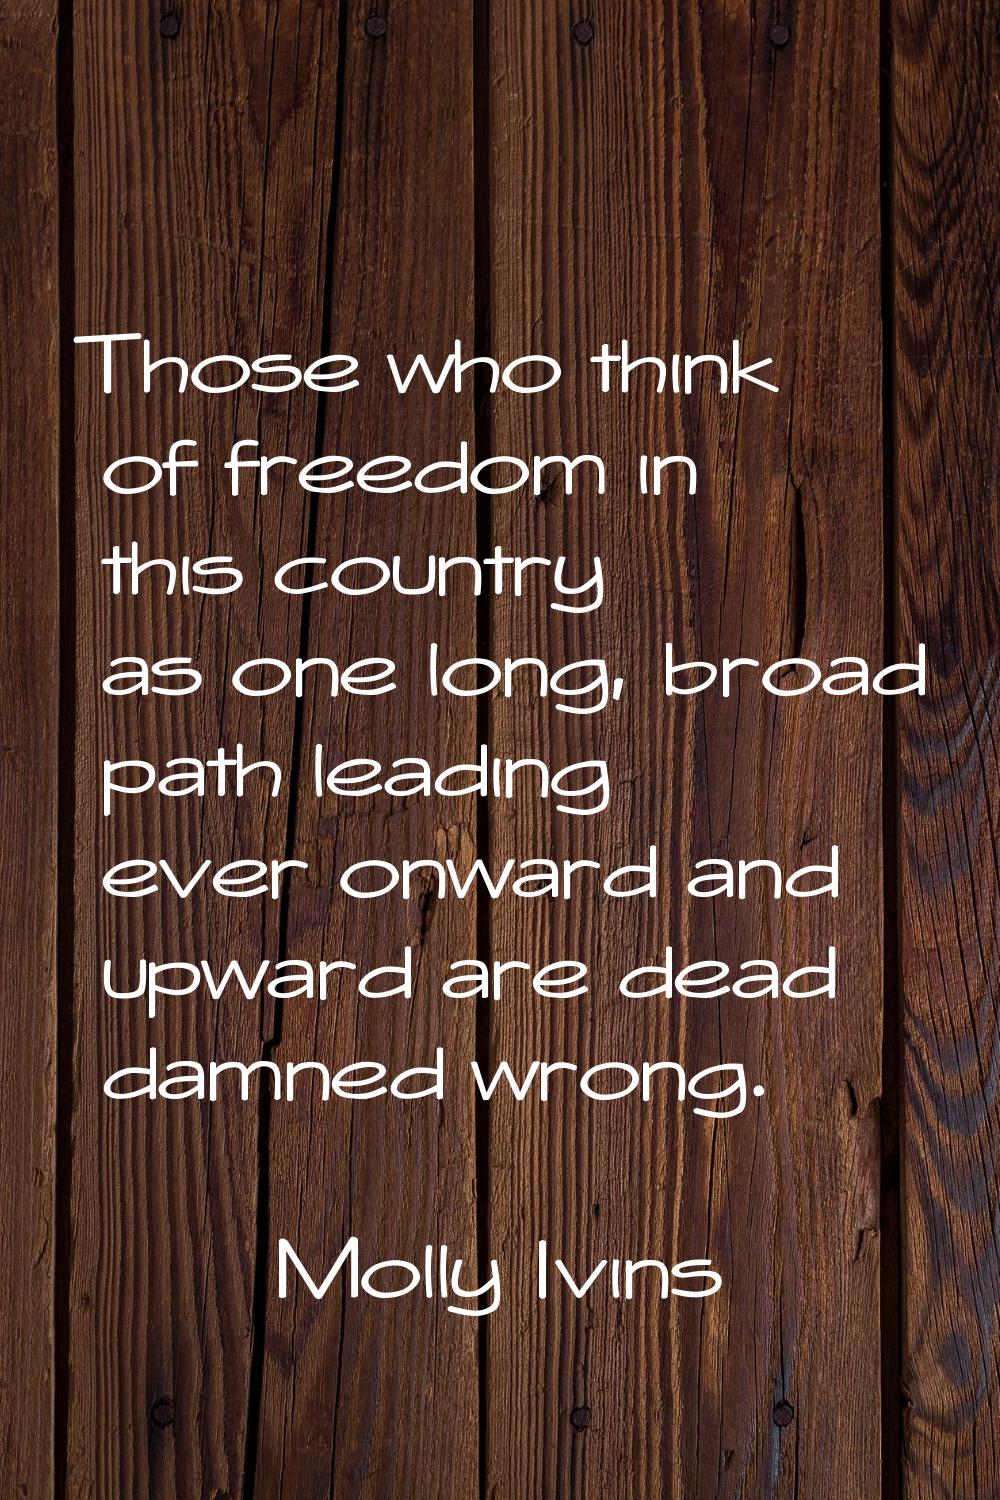 Those who think of freedom in this country as one long, broad path leading ever onward and upward a